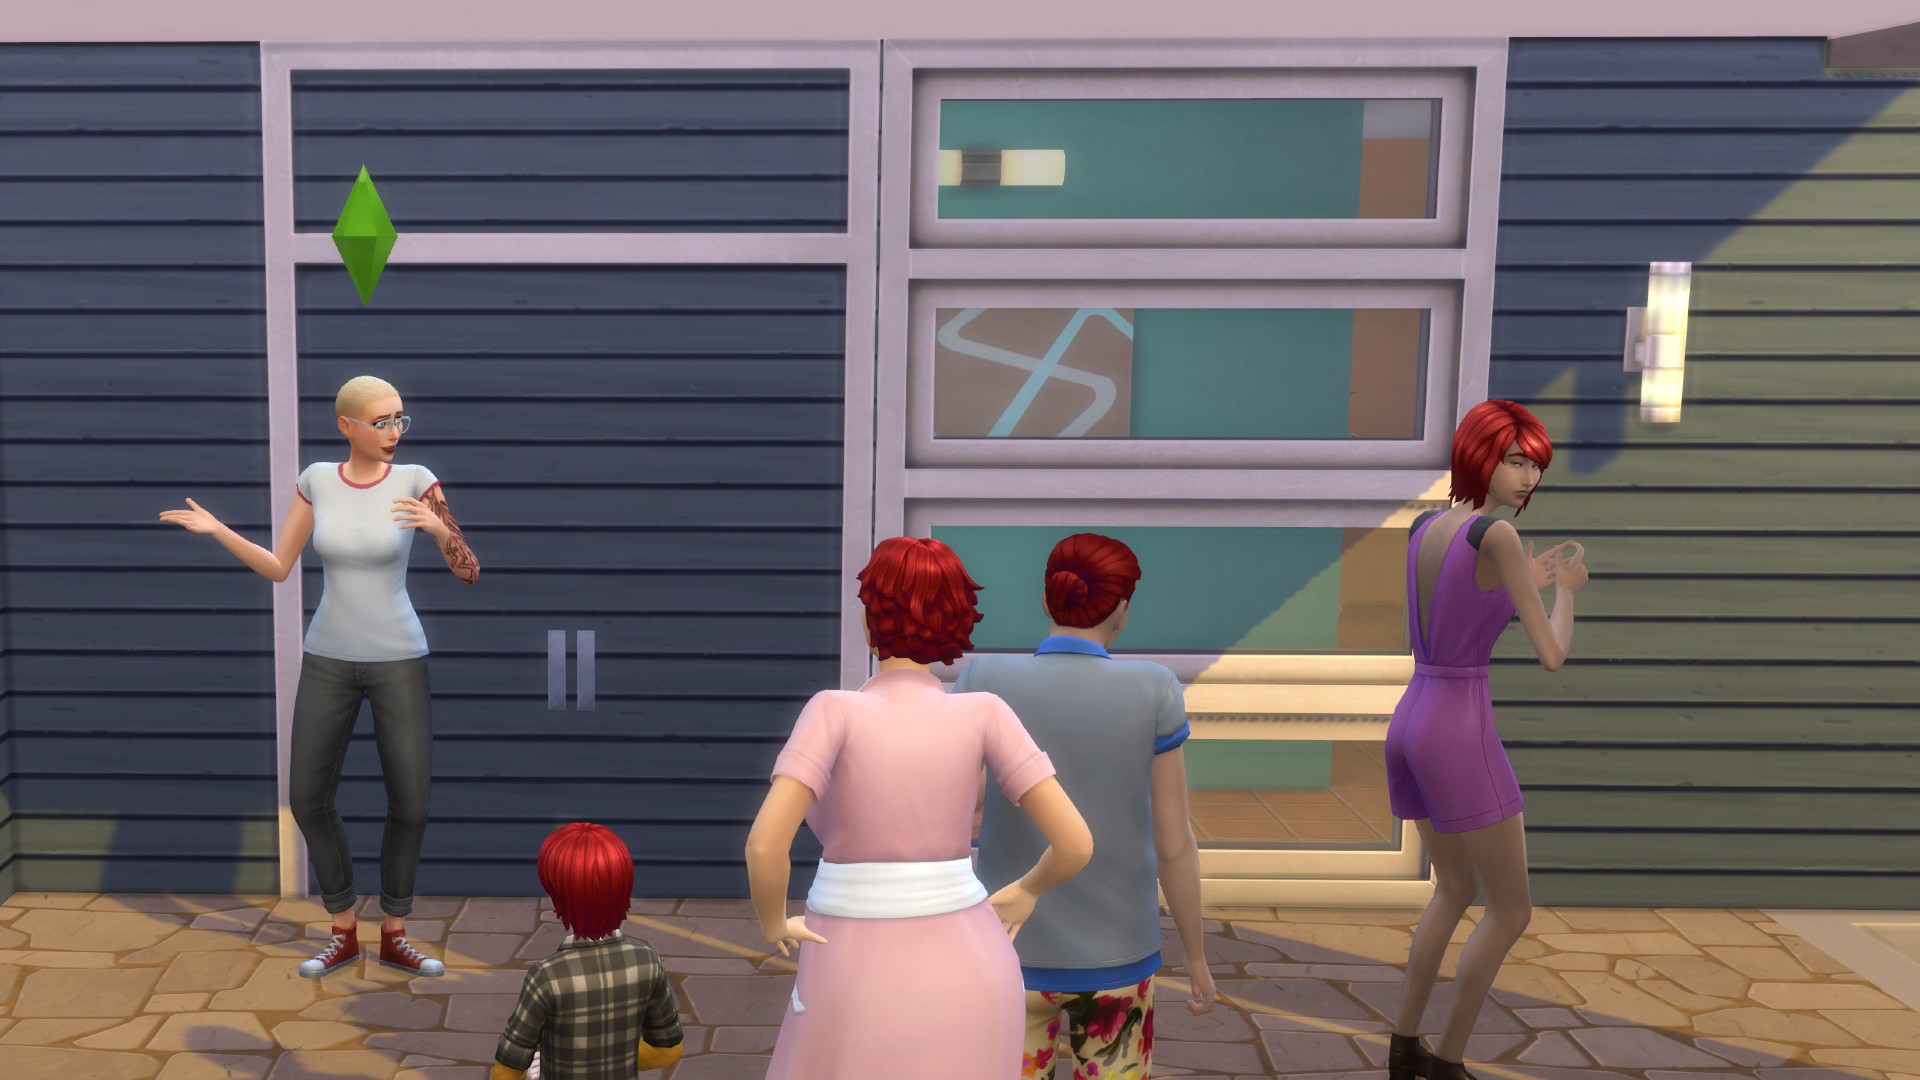 sims 4 cc color dont work with sims 4 first person update